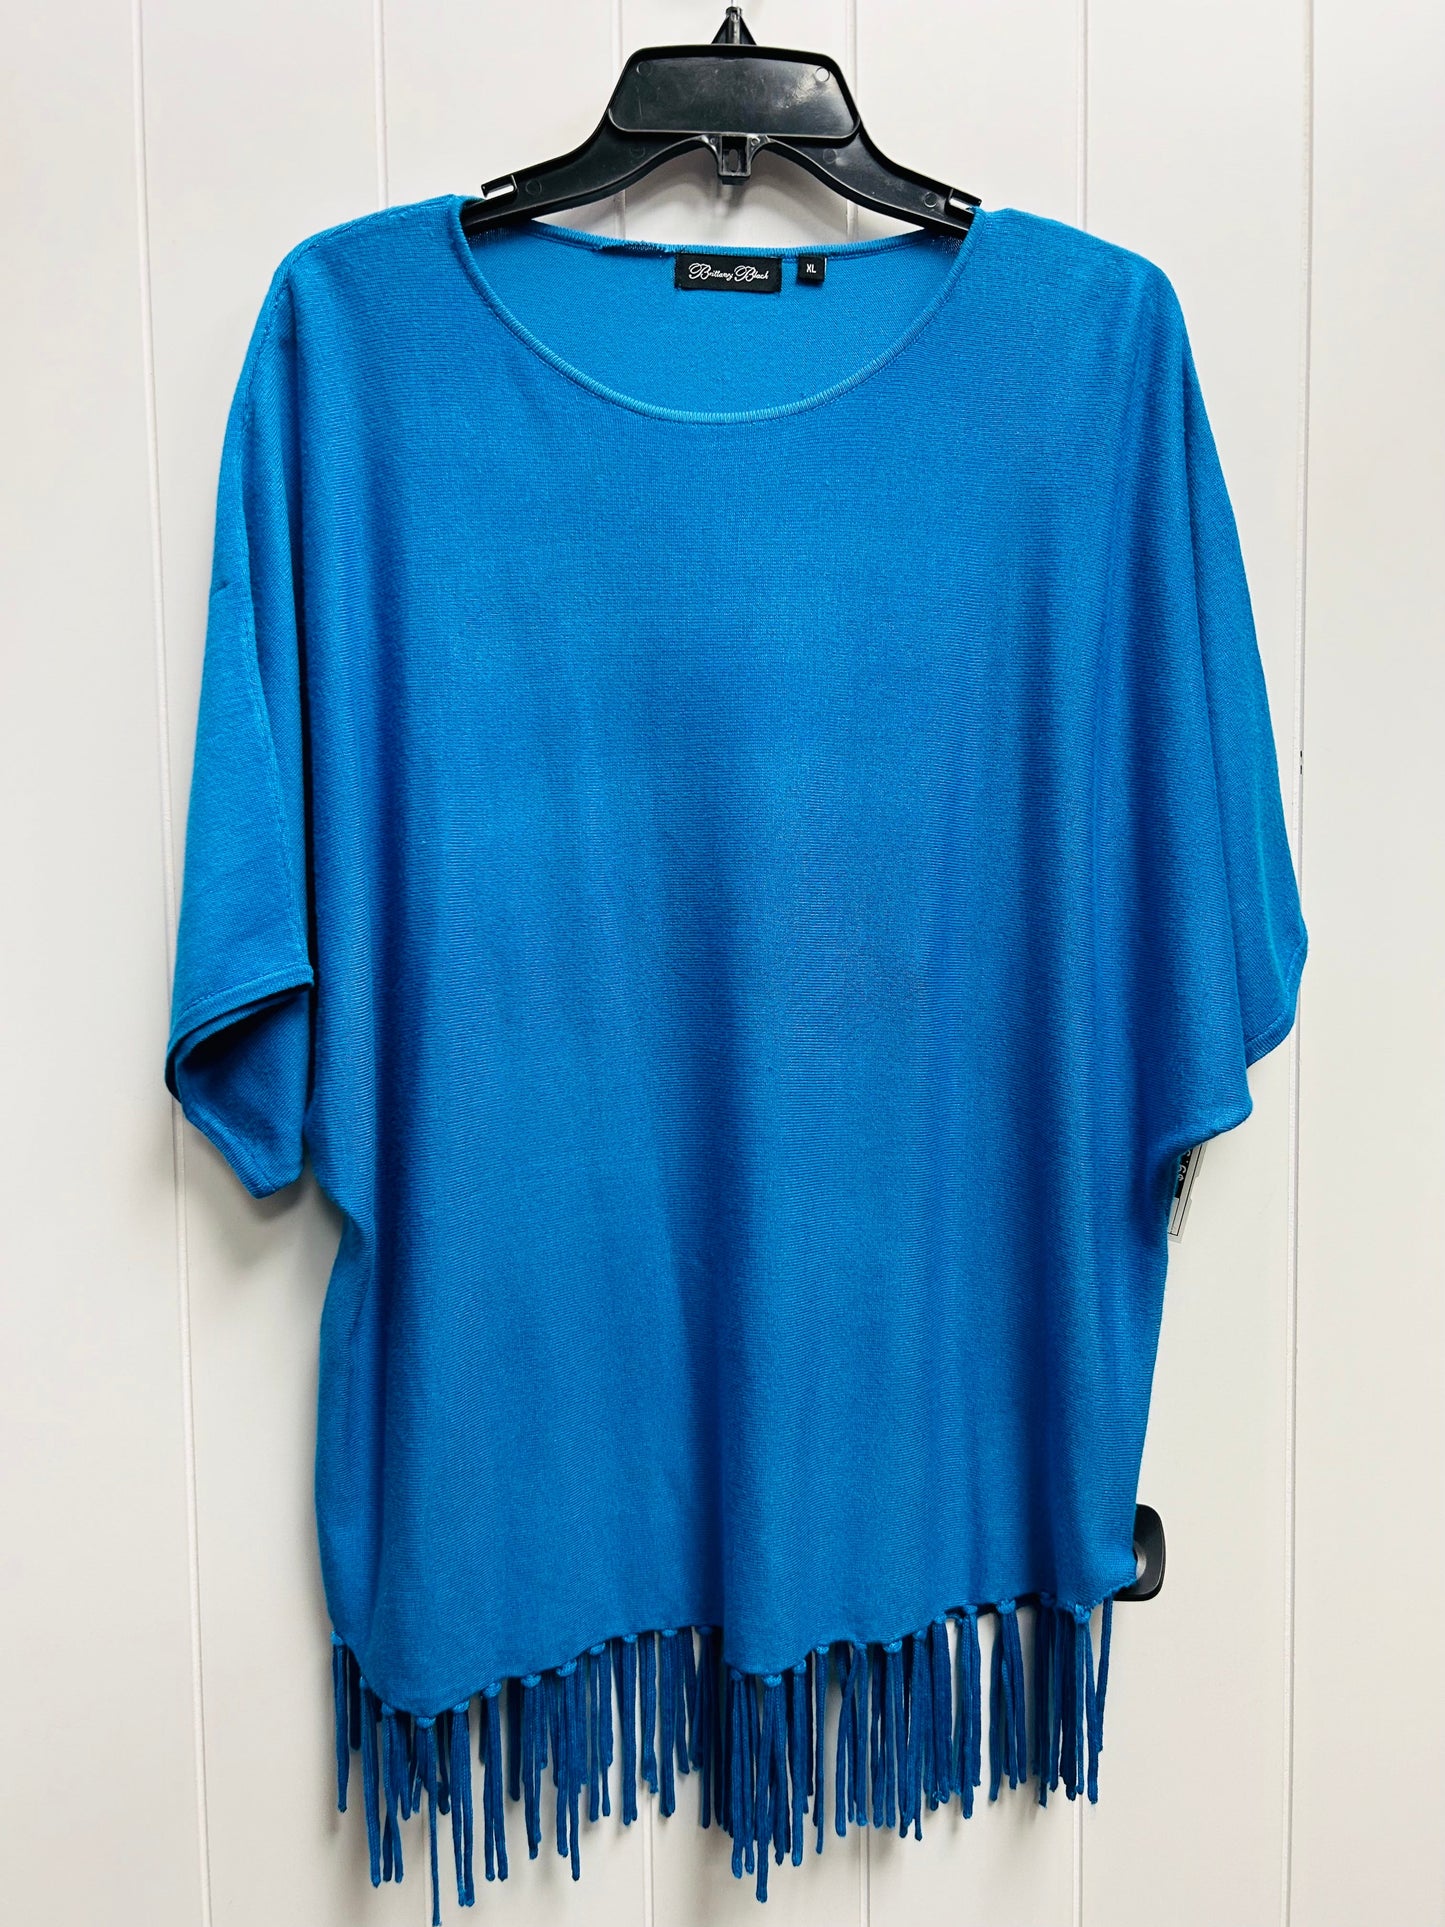 Blue Top Short Sleeve Brittany Black, Size Xl